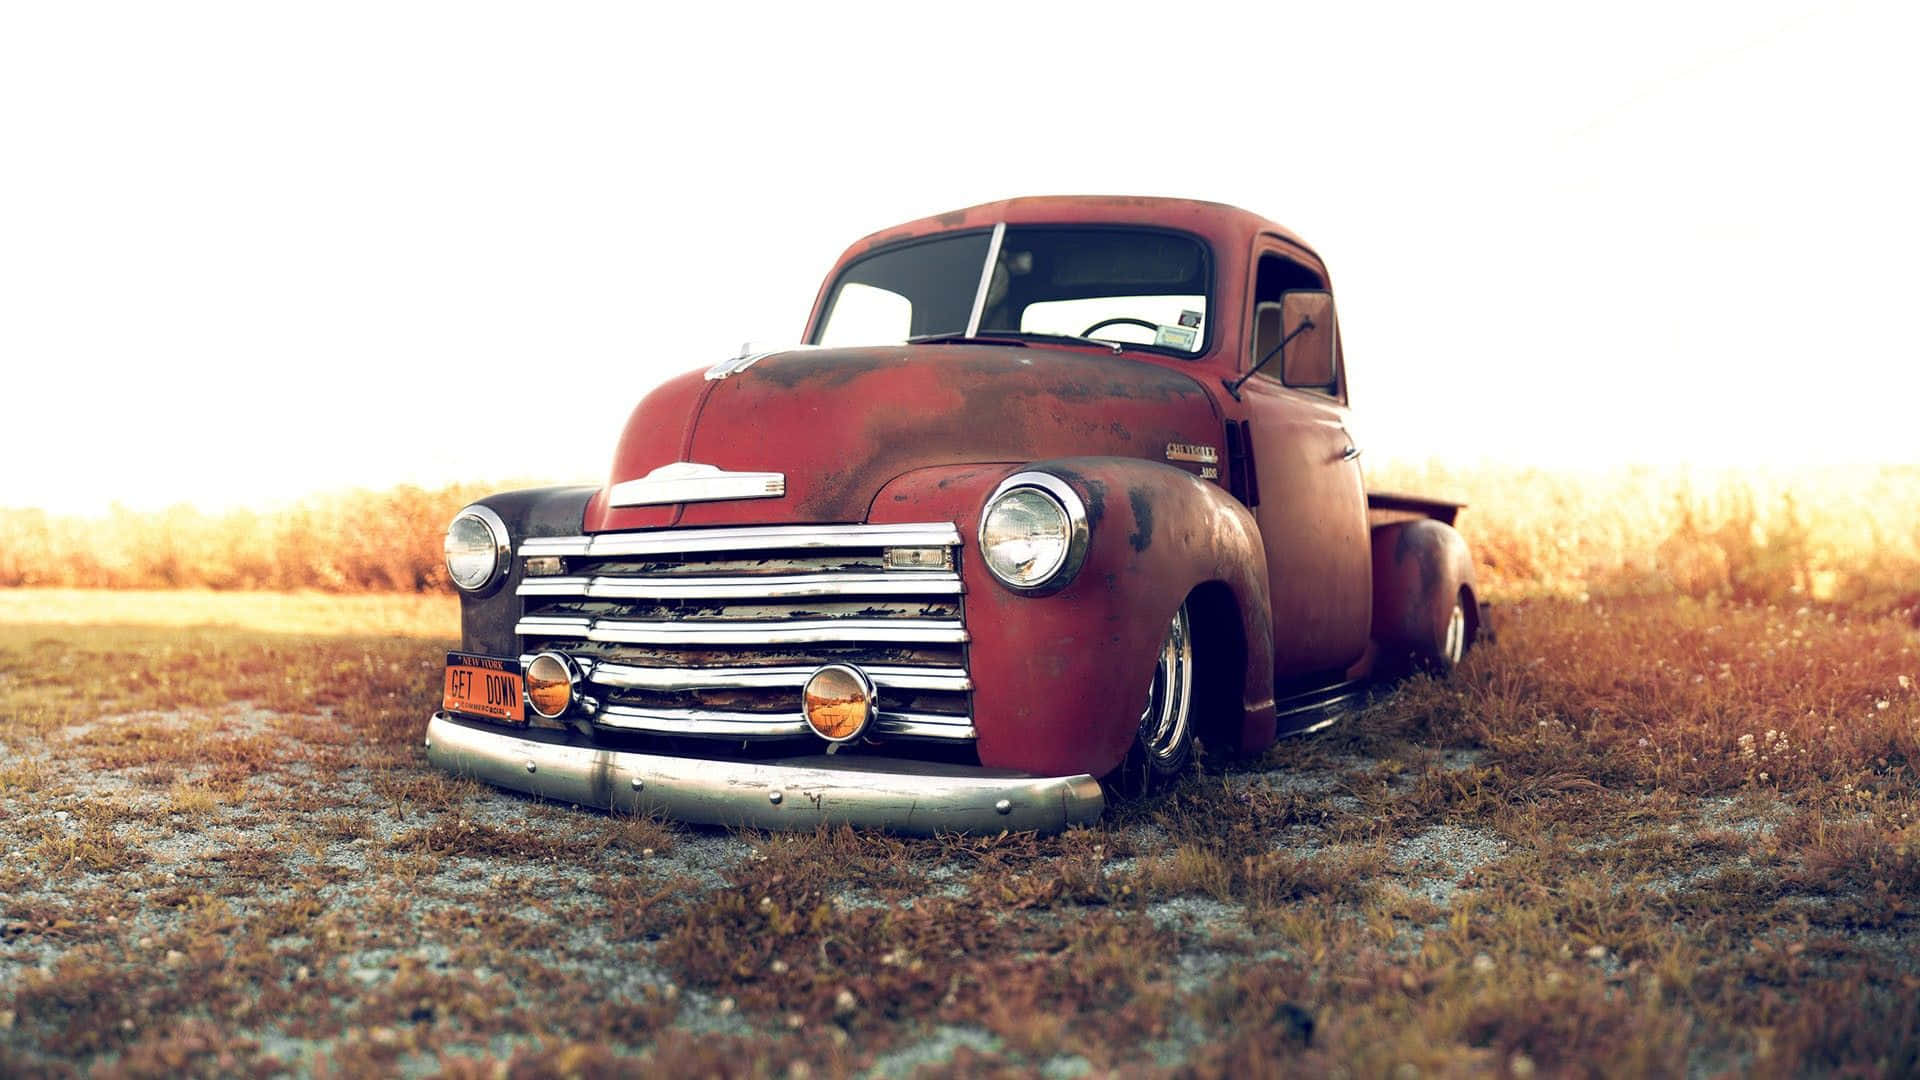 Get Ready to Ride in Style with the Low Truck Wallpaper